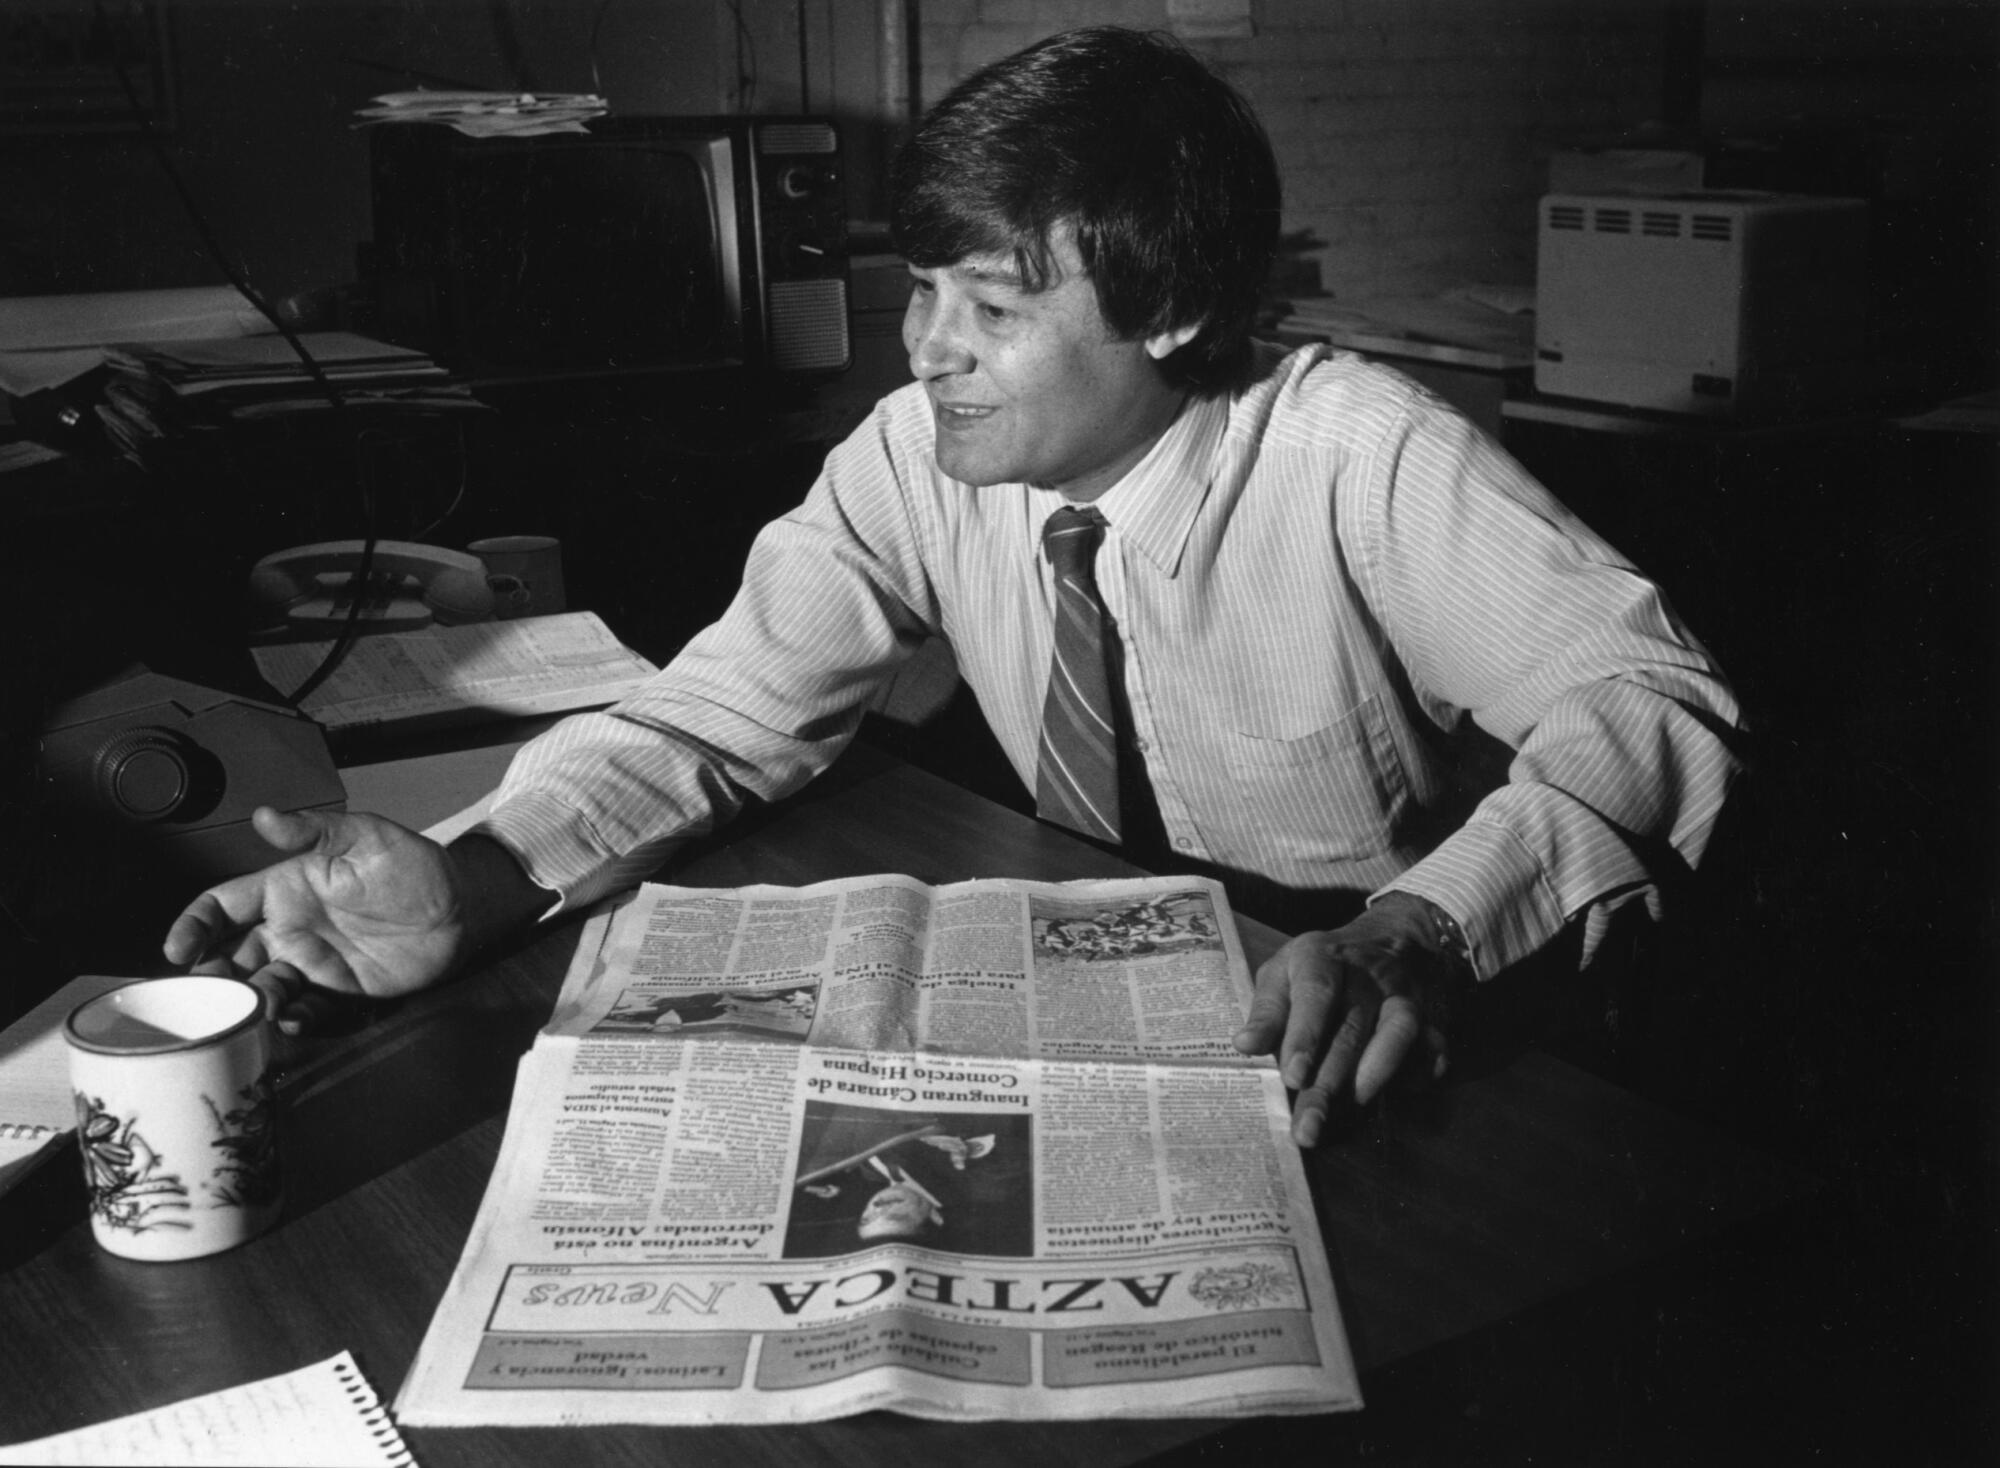 A black and white photo shows a seated man with a newspaper in front of him on a table.